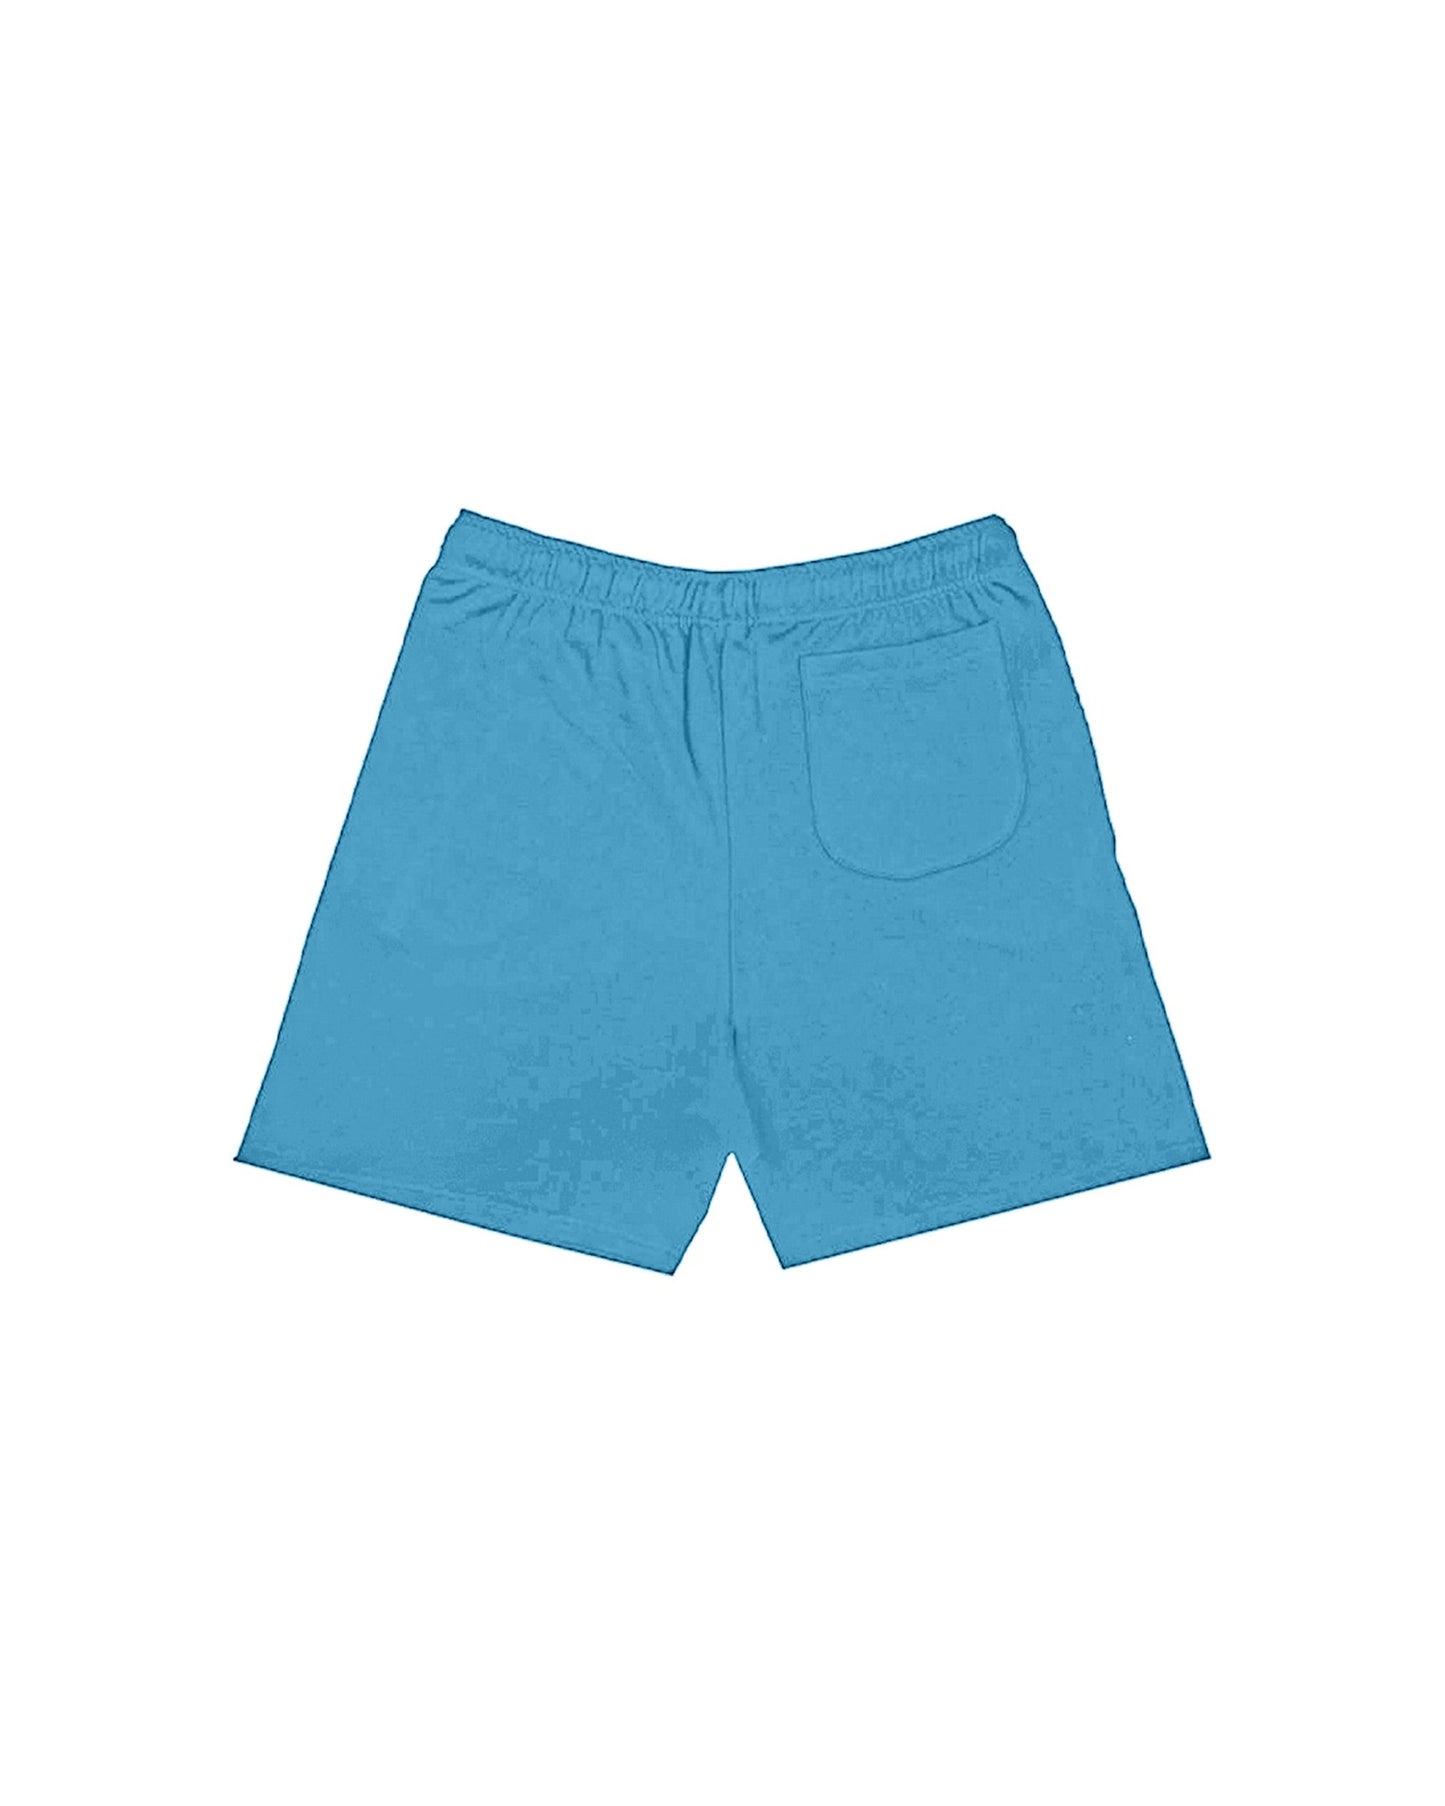 T1M DNA SHORTS